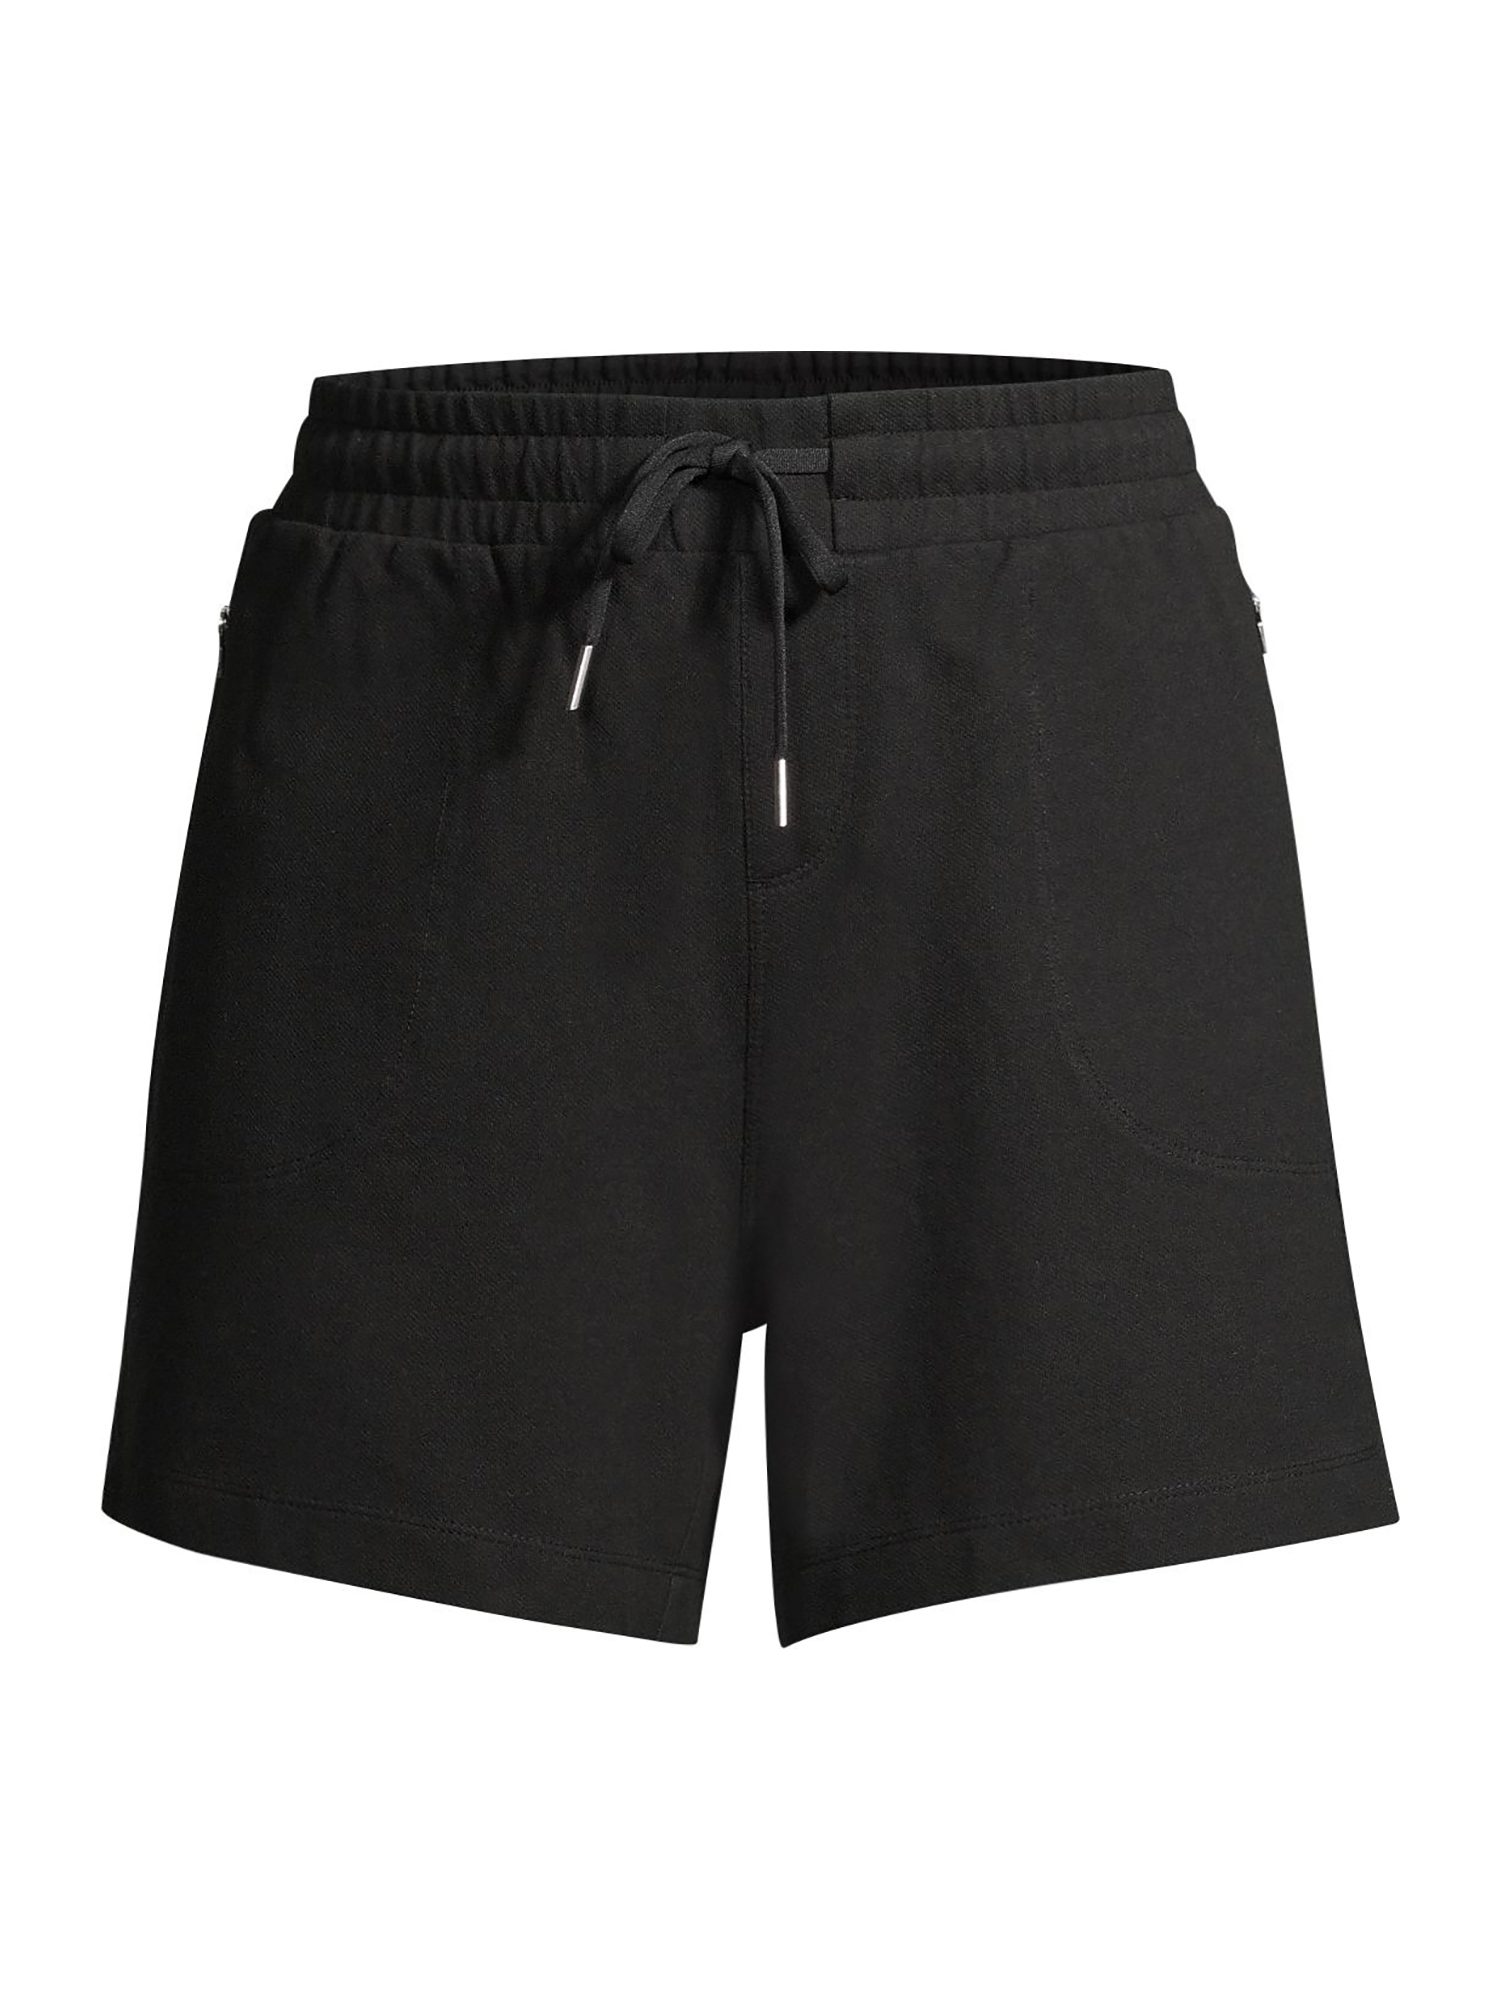 Athletic Works Women's Athleisure Commuter Shorts - image 3 of 7